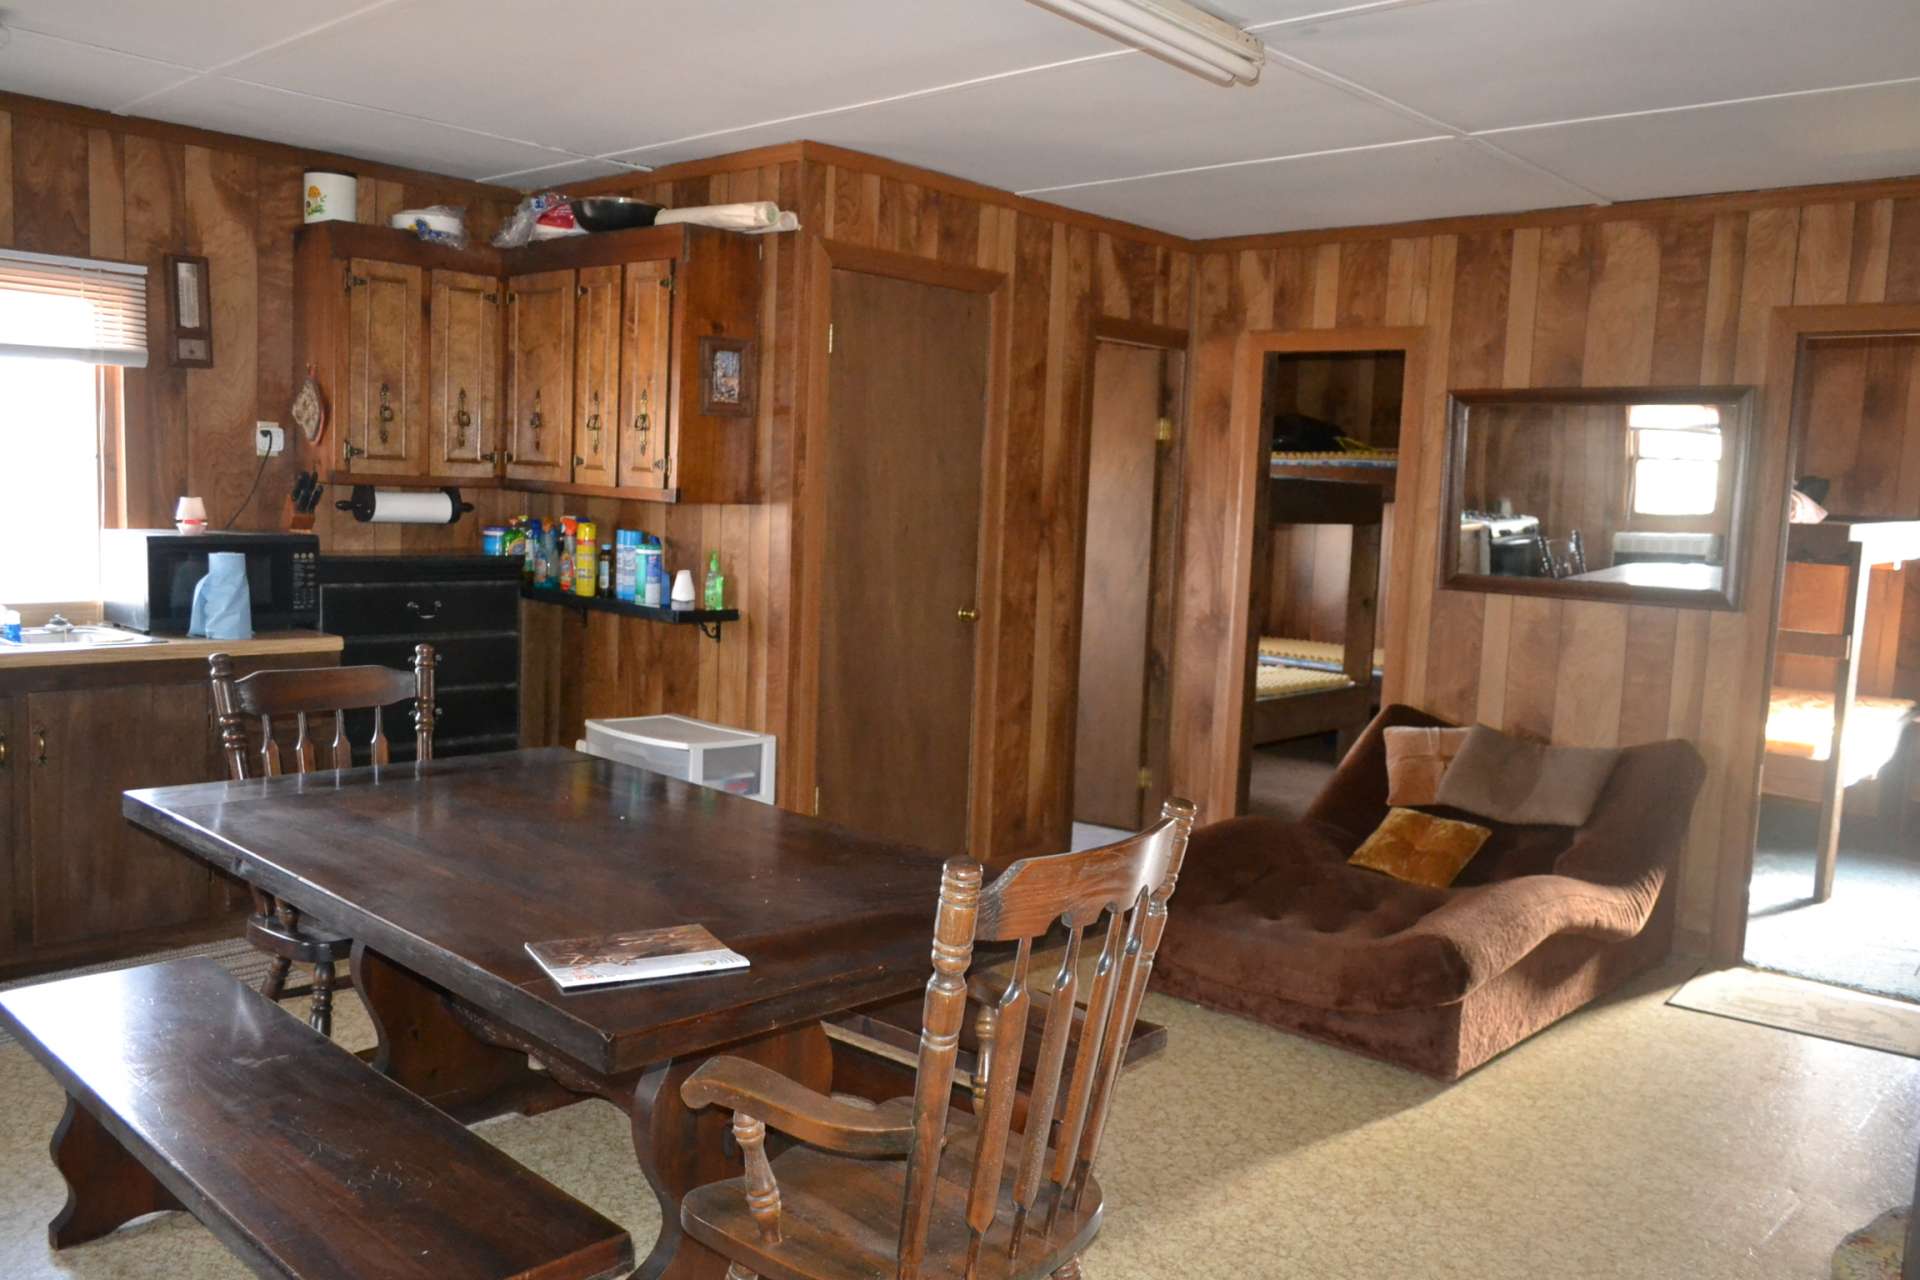 An open great room includes the living, kitchen and dining area with wood stove and propane heater.